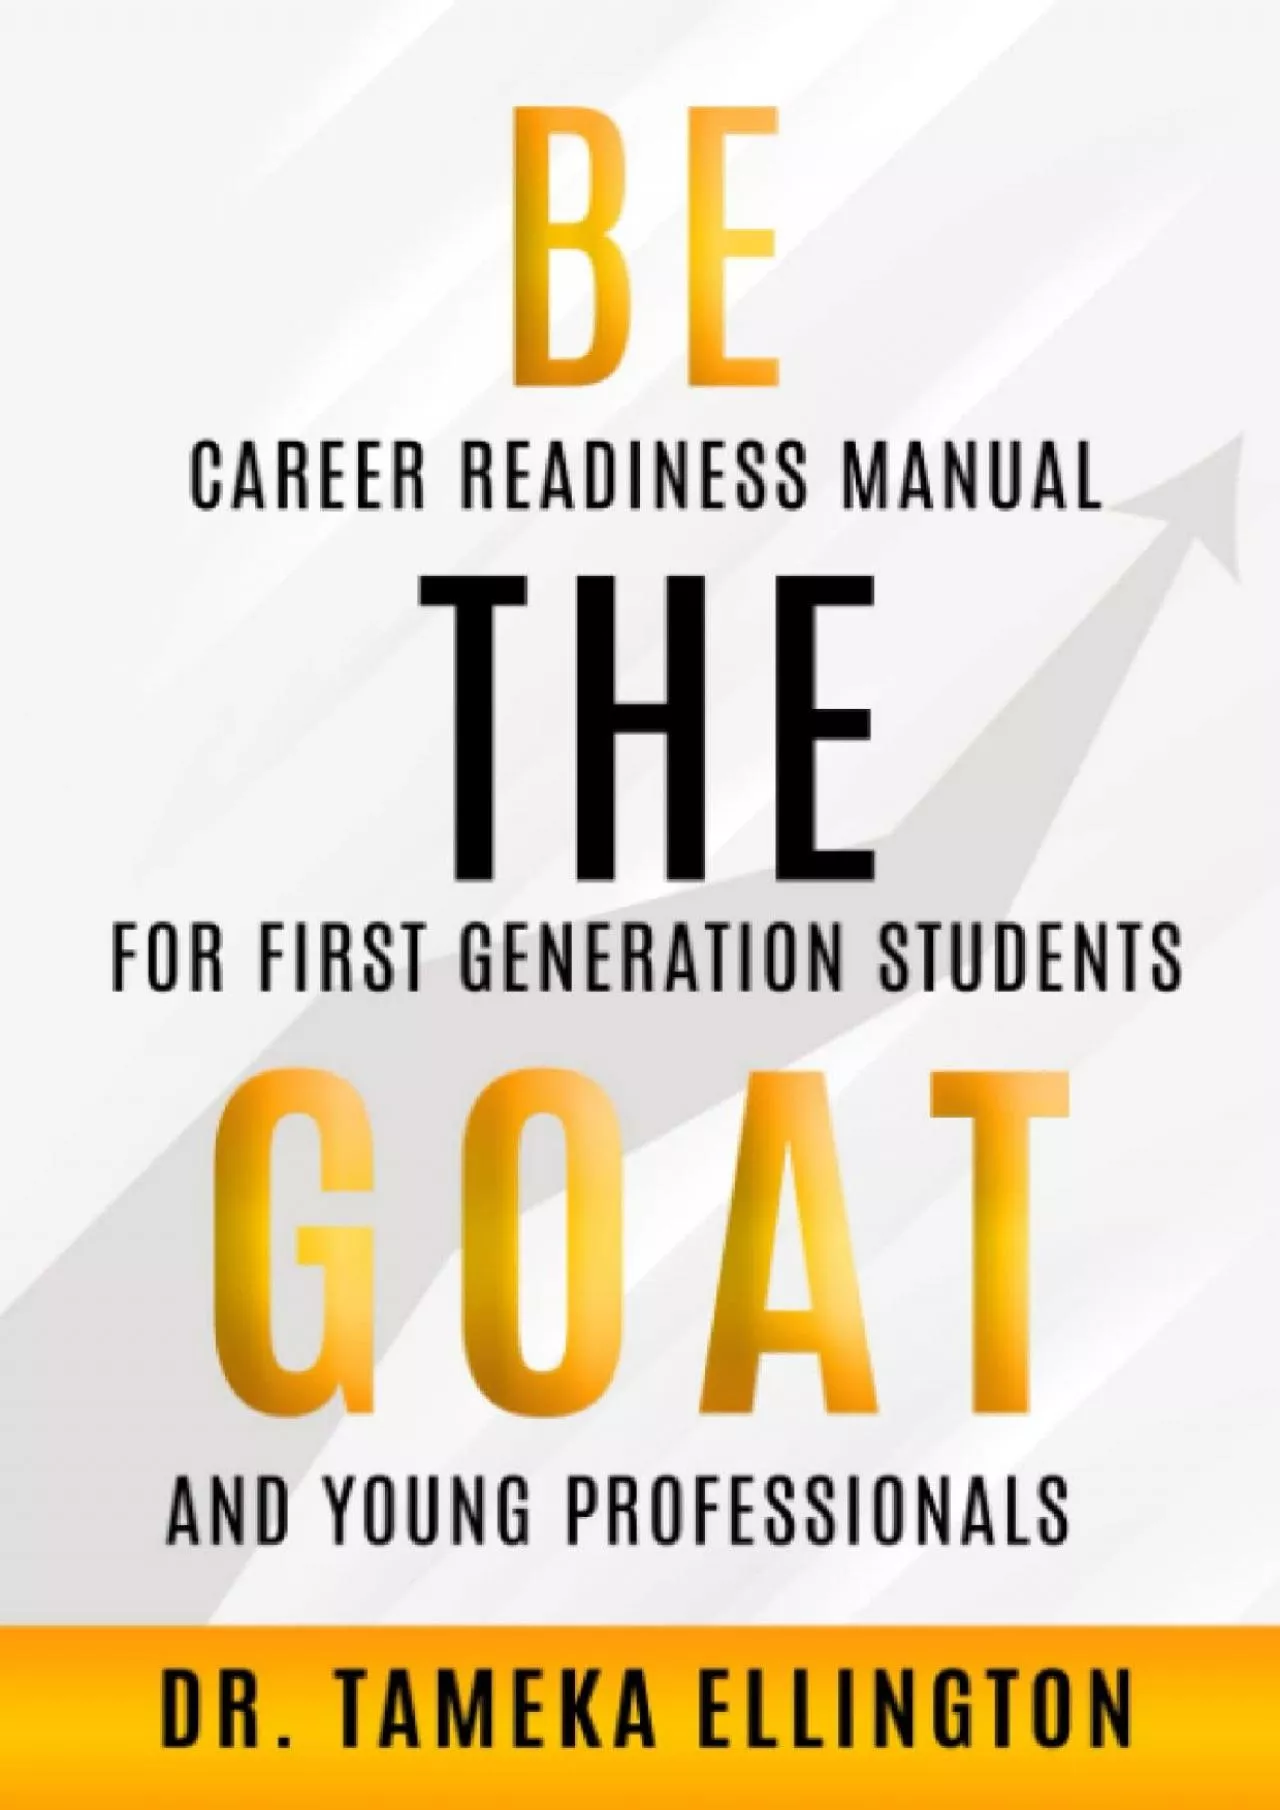 [EBOOK] Be the GOAT: Career Readiness Manual for First Generation Students and Young Professionals